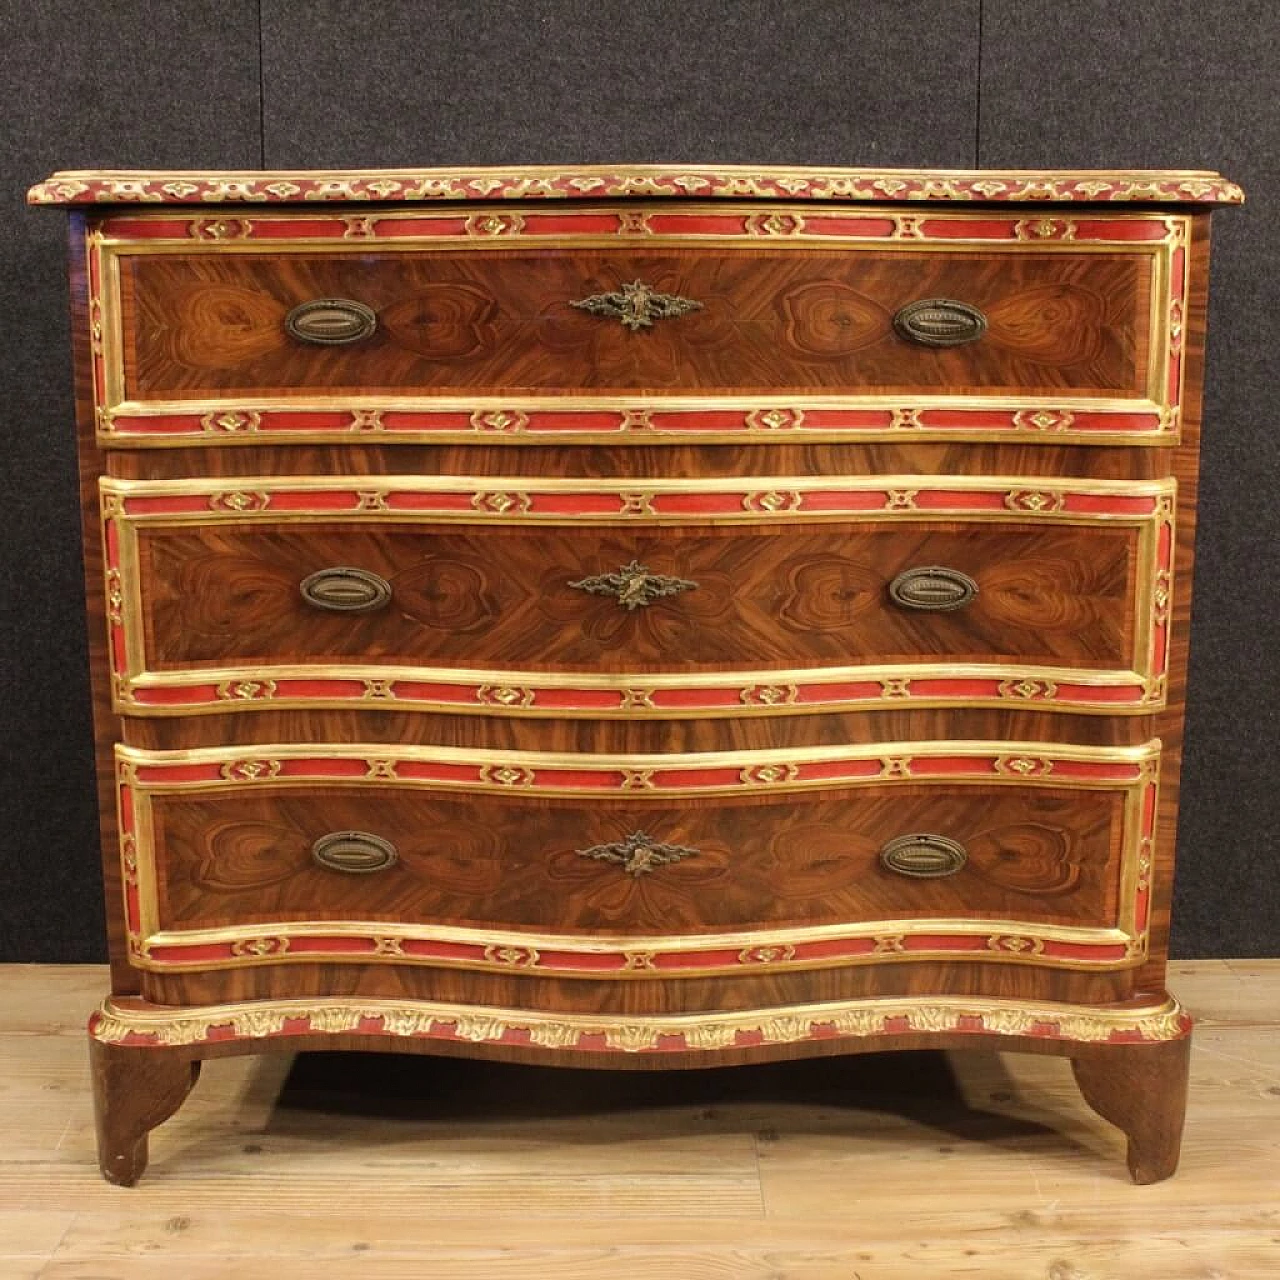 Genoese inlaid, lacquered and gilded wood dresser 3